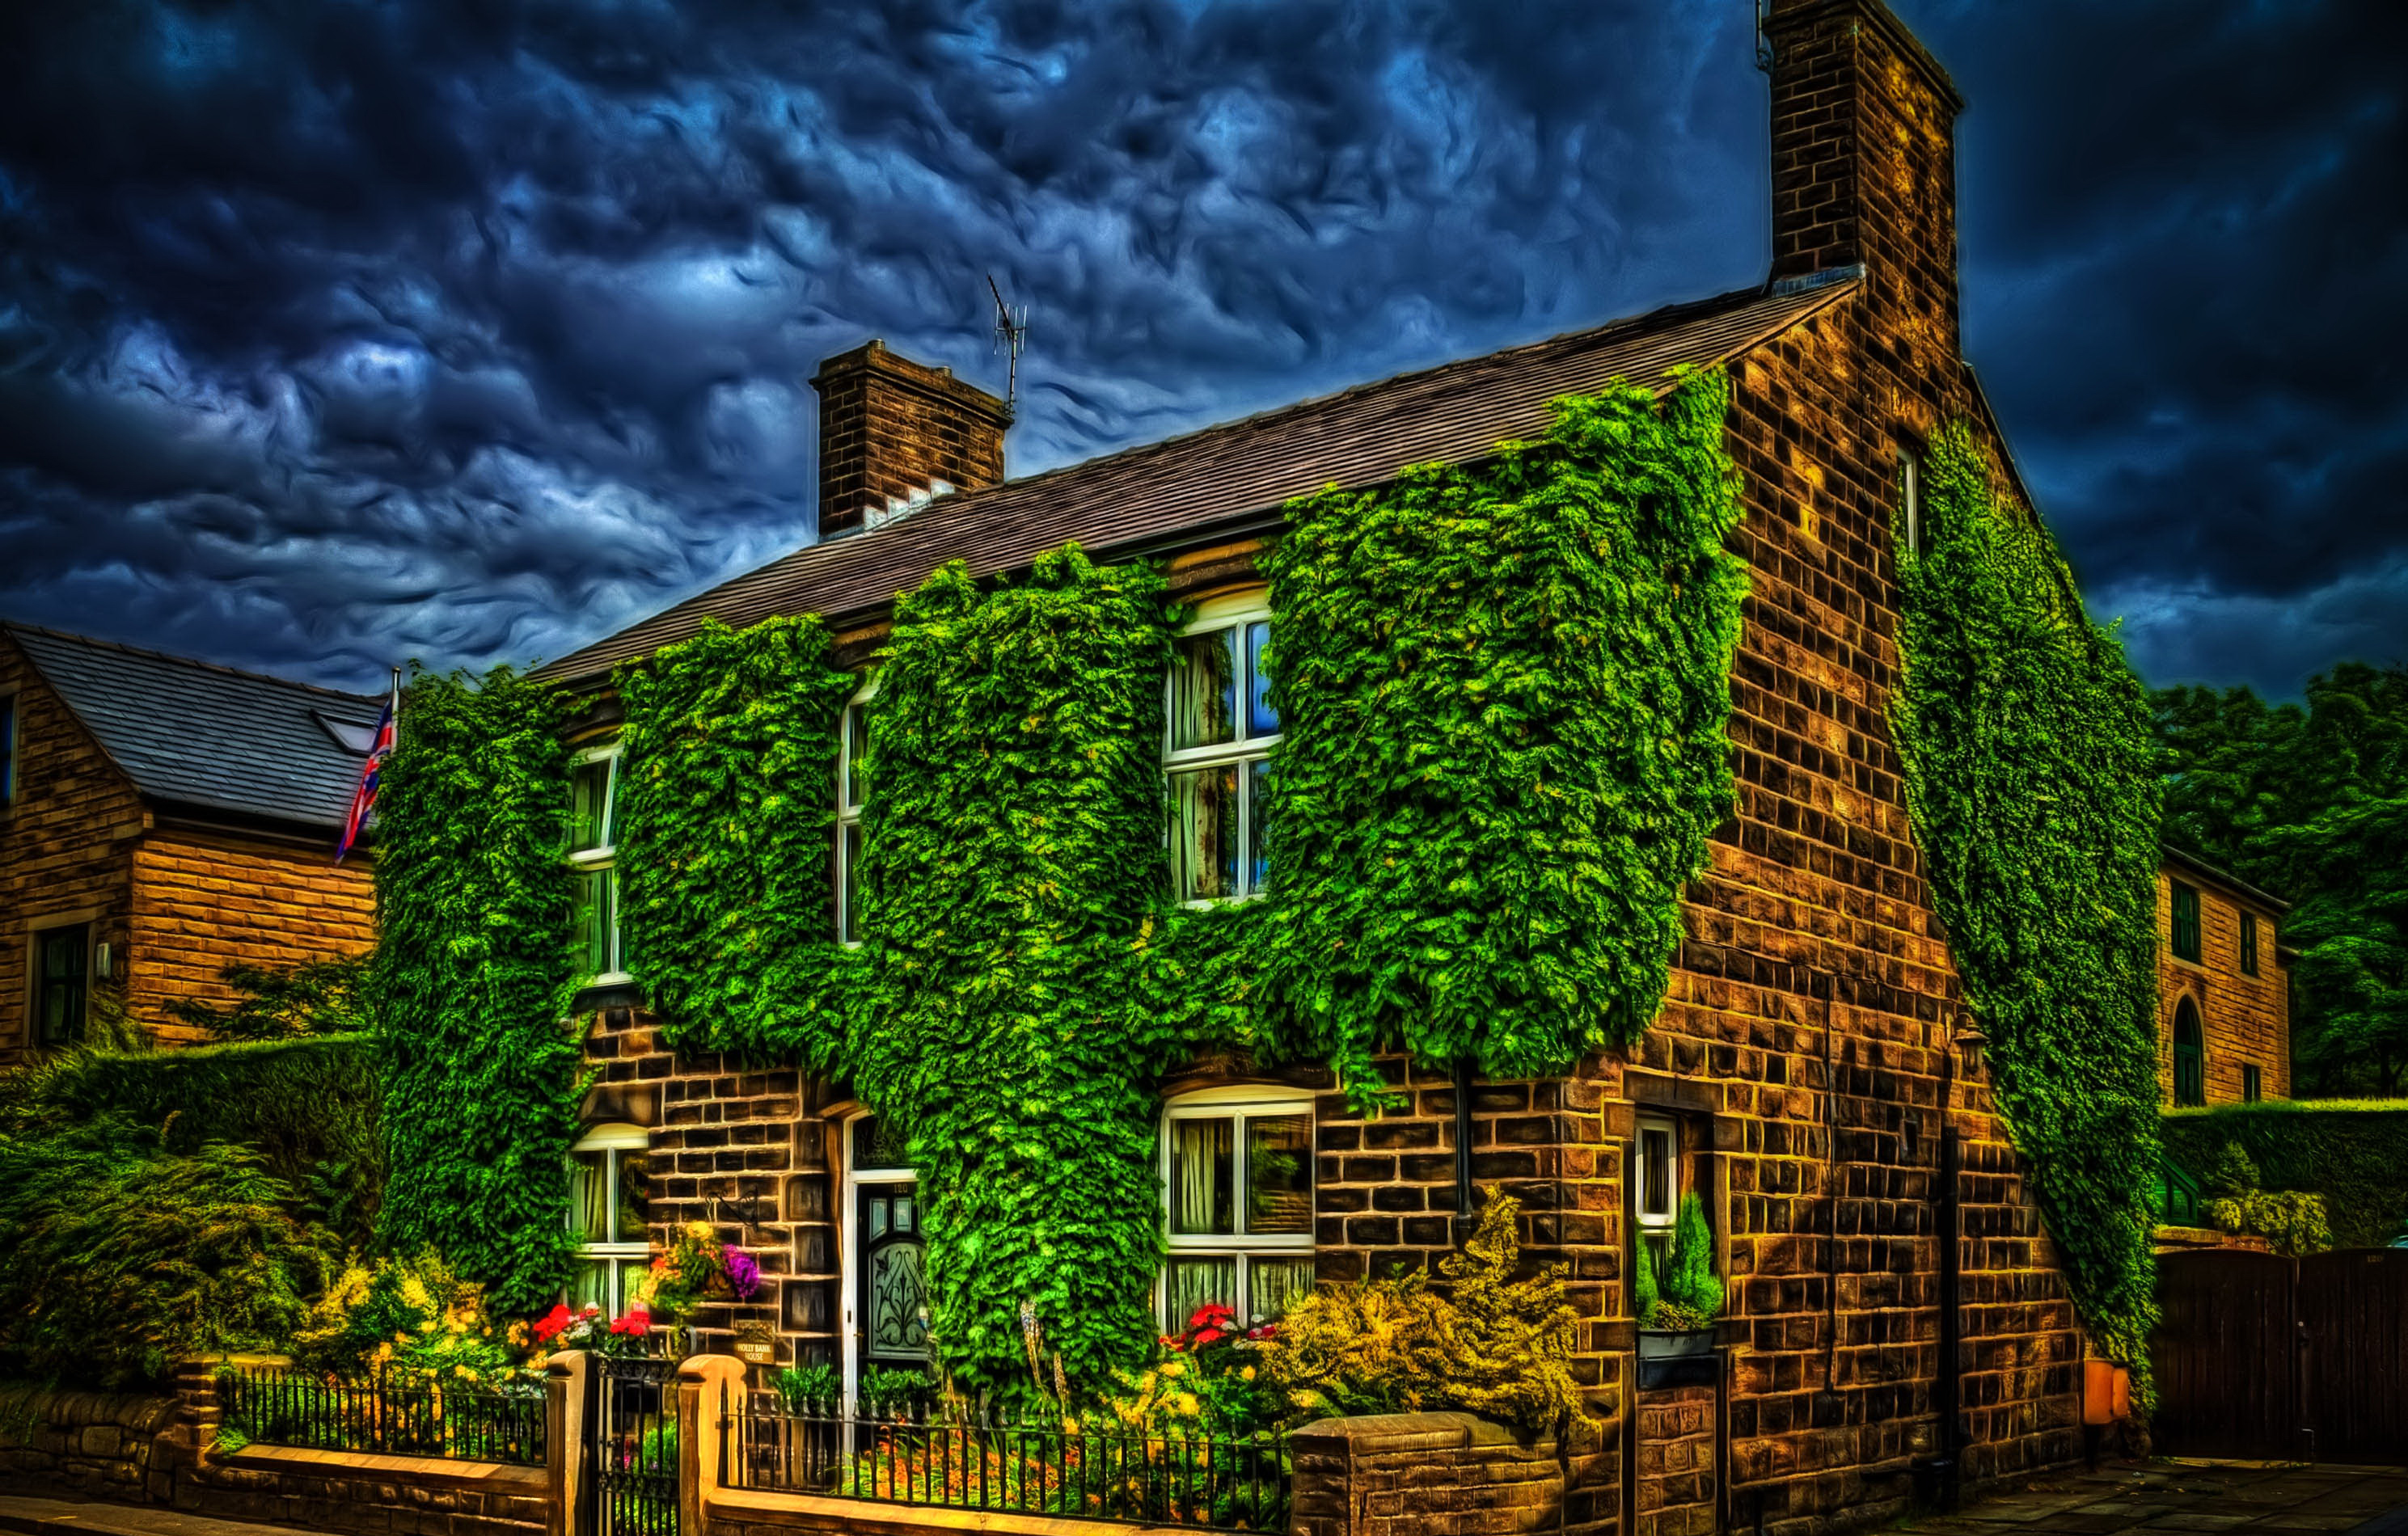 green, england, brick, photography, hdr, architecture, house, leaf, vine cellphone